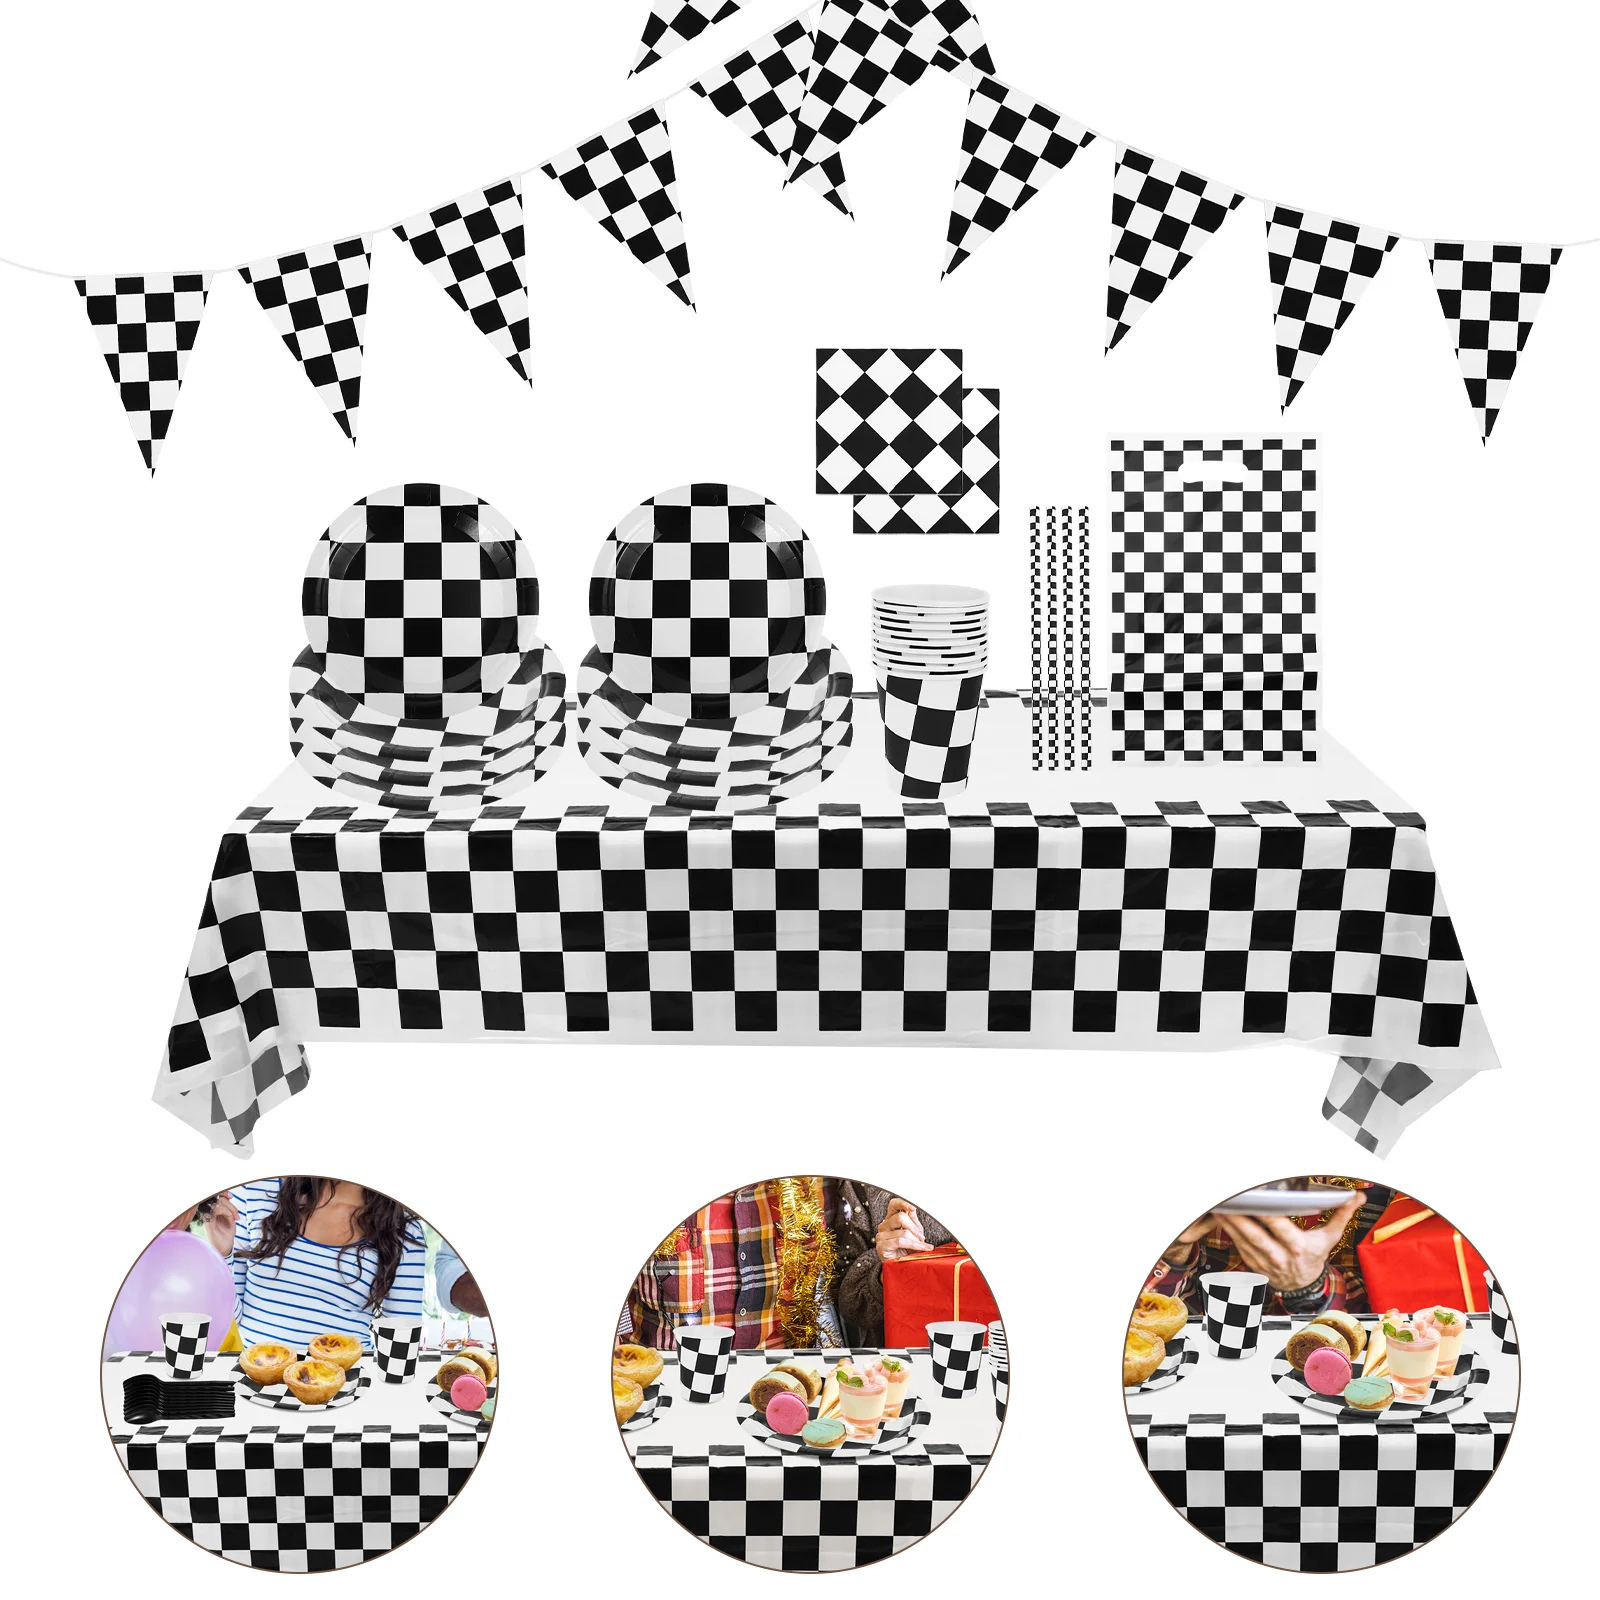 

Paper Plate Car Birthday Party Supplies Checkered Cups Plates The Banner Racing Decorations Themed White Cardboard Black